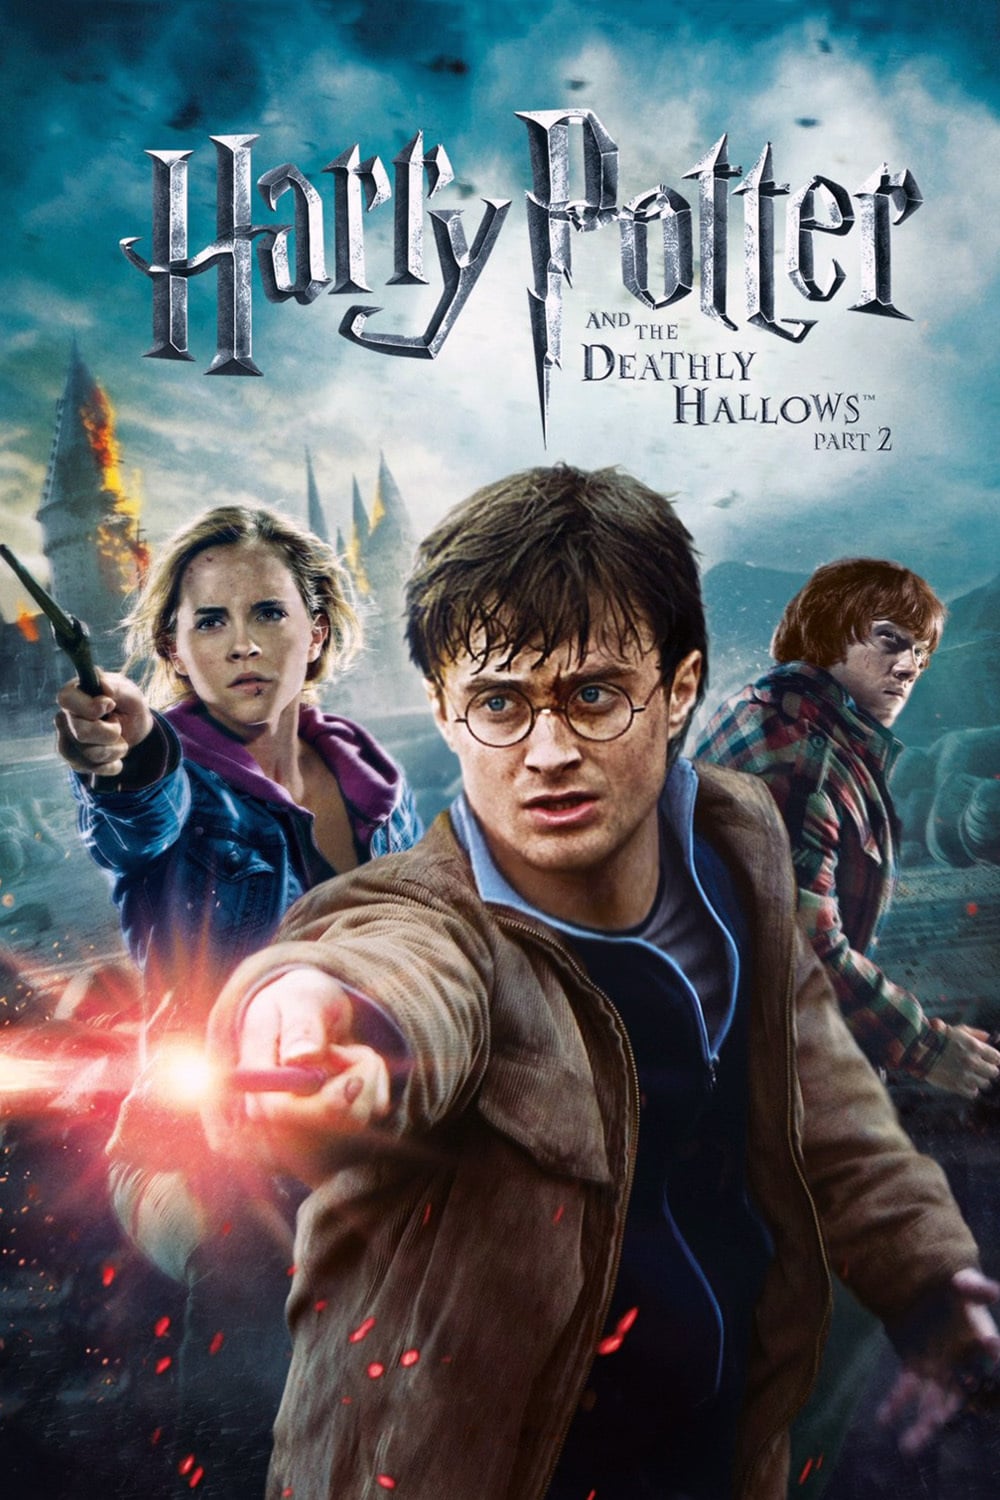 Harry potter 2 movies download in hindi easeokkseo